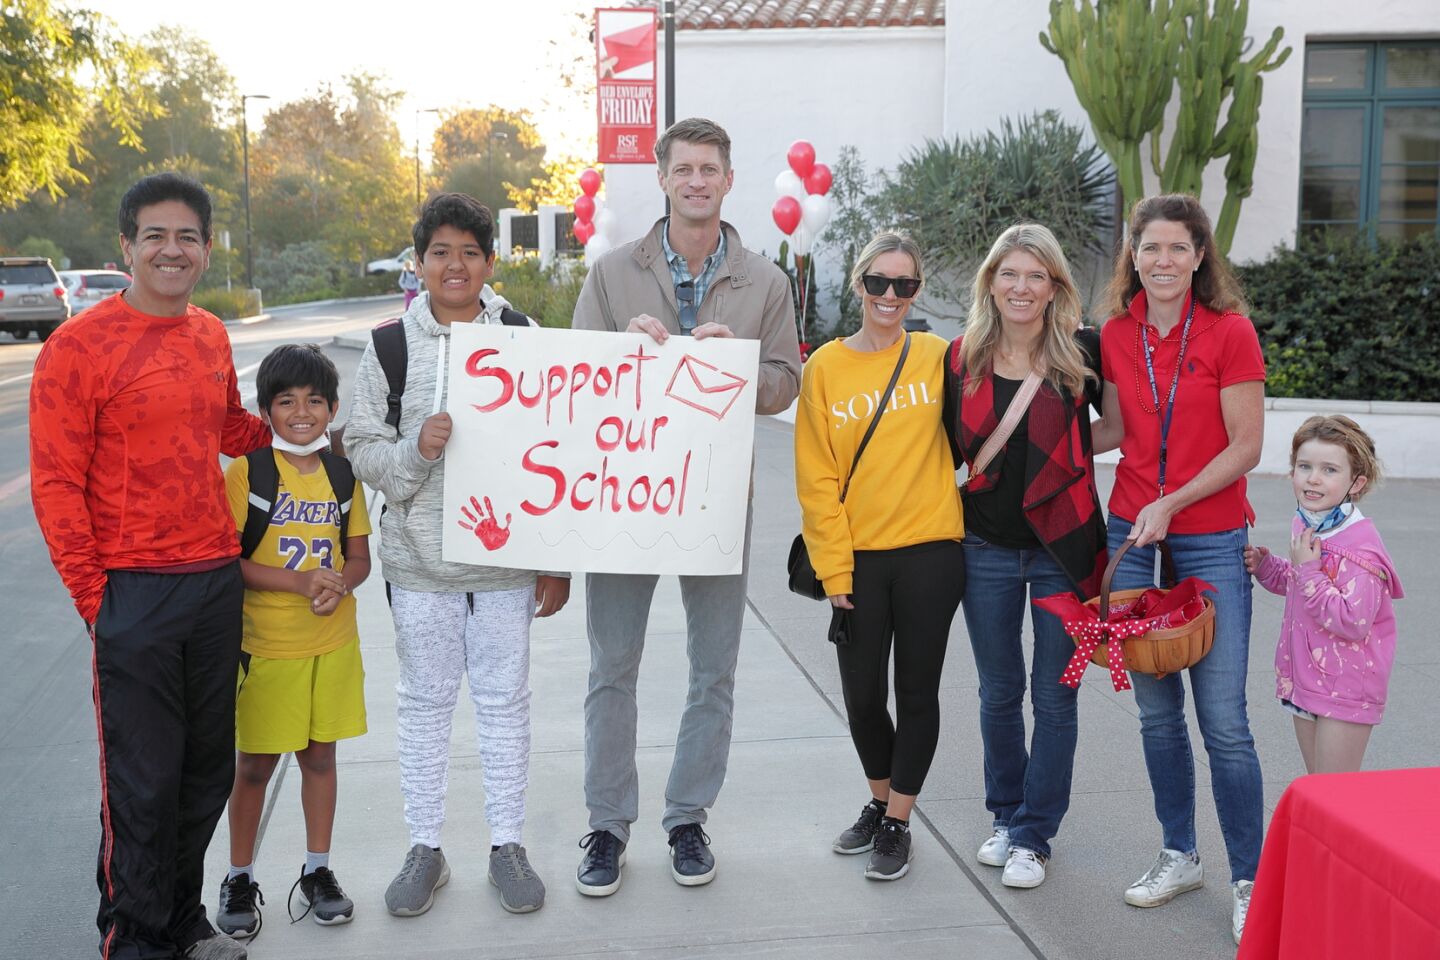 Jee Manghani (School Board Member), Cash and Justice Manghani, Todd Bennett (RSFEF Board Member), Haley Rayden, Katie Crecion (RSFEF Board Member), Kate Butler (RSFEF Co-Chairman), Claire Vieira